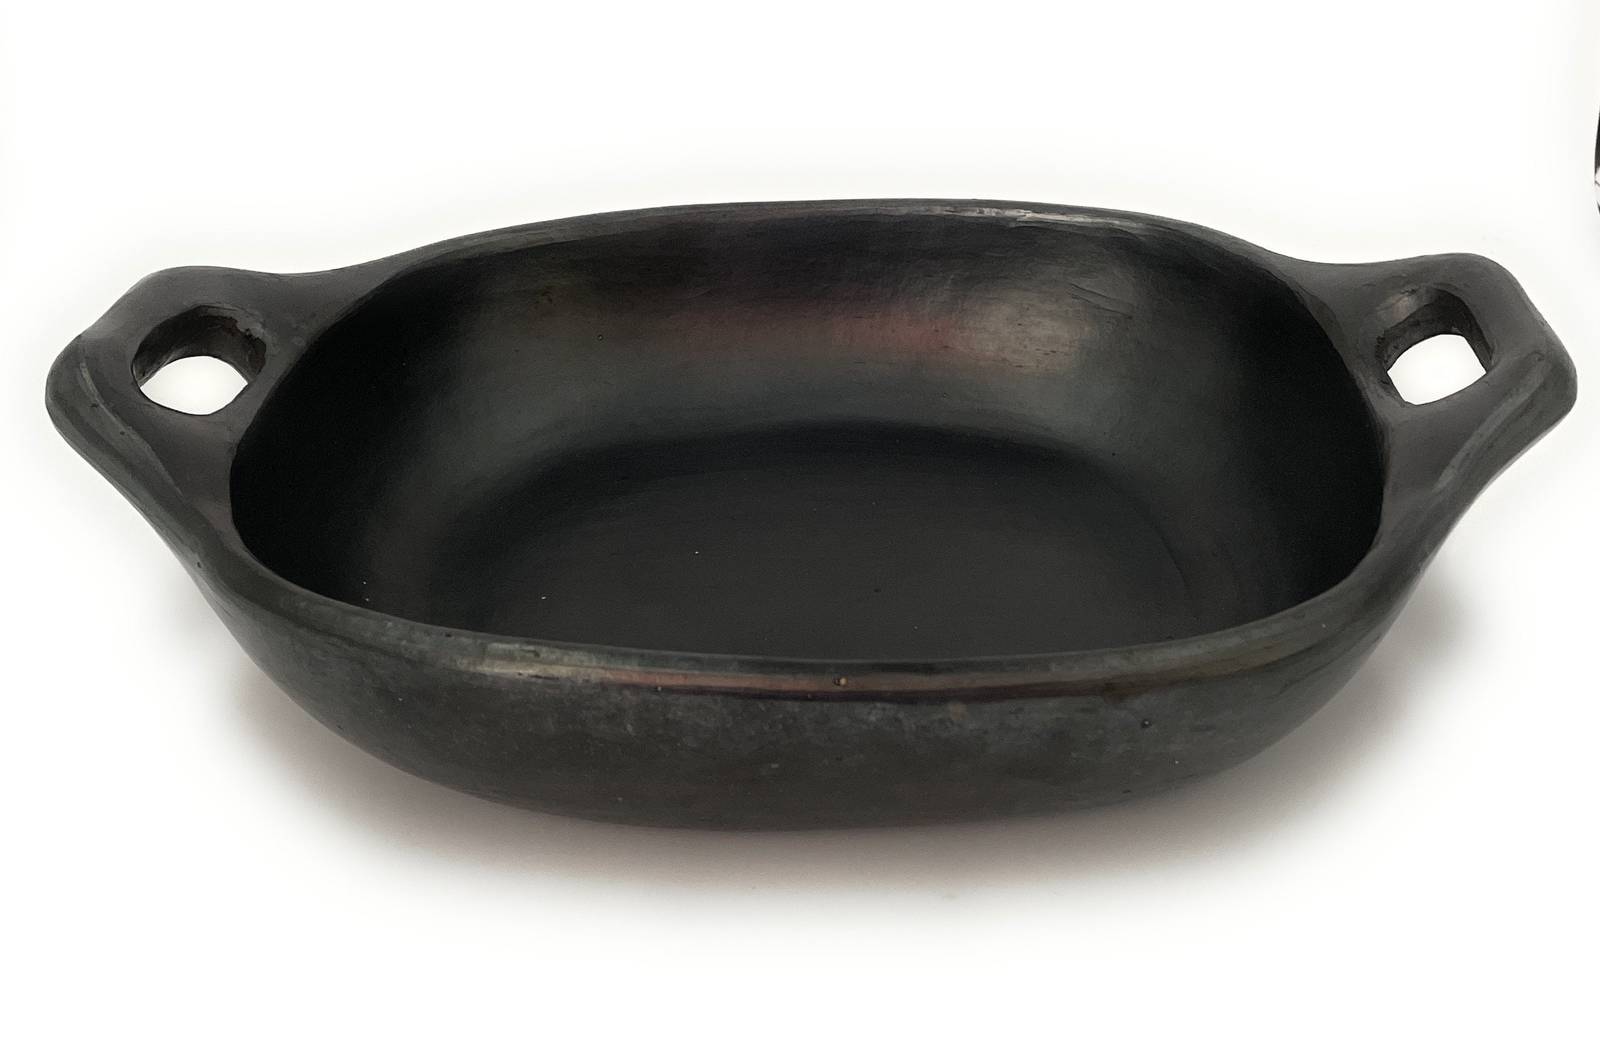 Primary image for Square Roasting Pan 13 x 11.5" hight 3" with Handle 16" Black Clay Original Hand